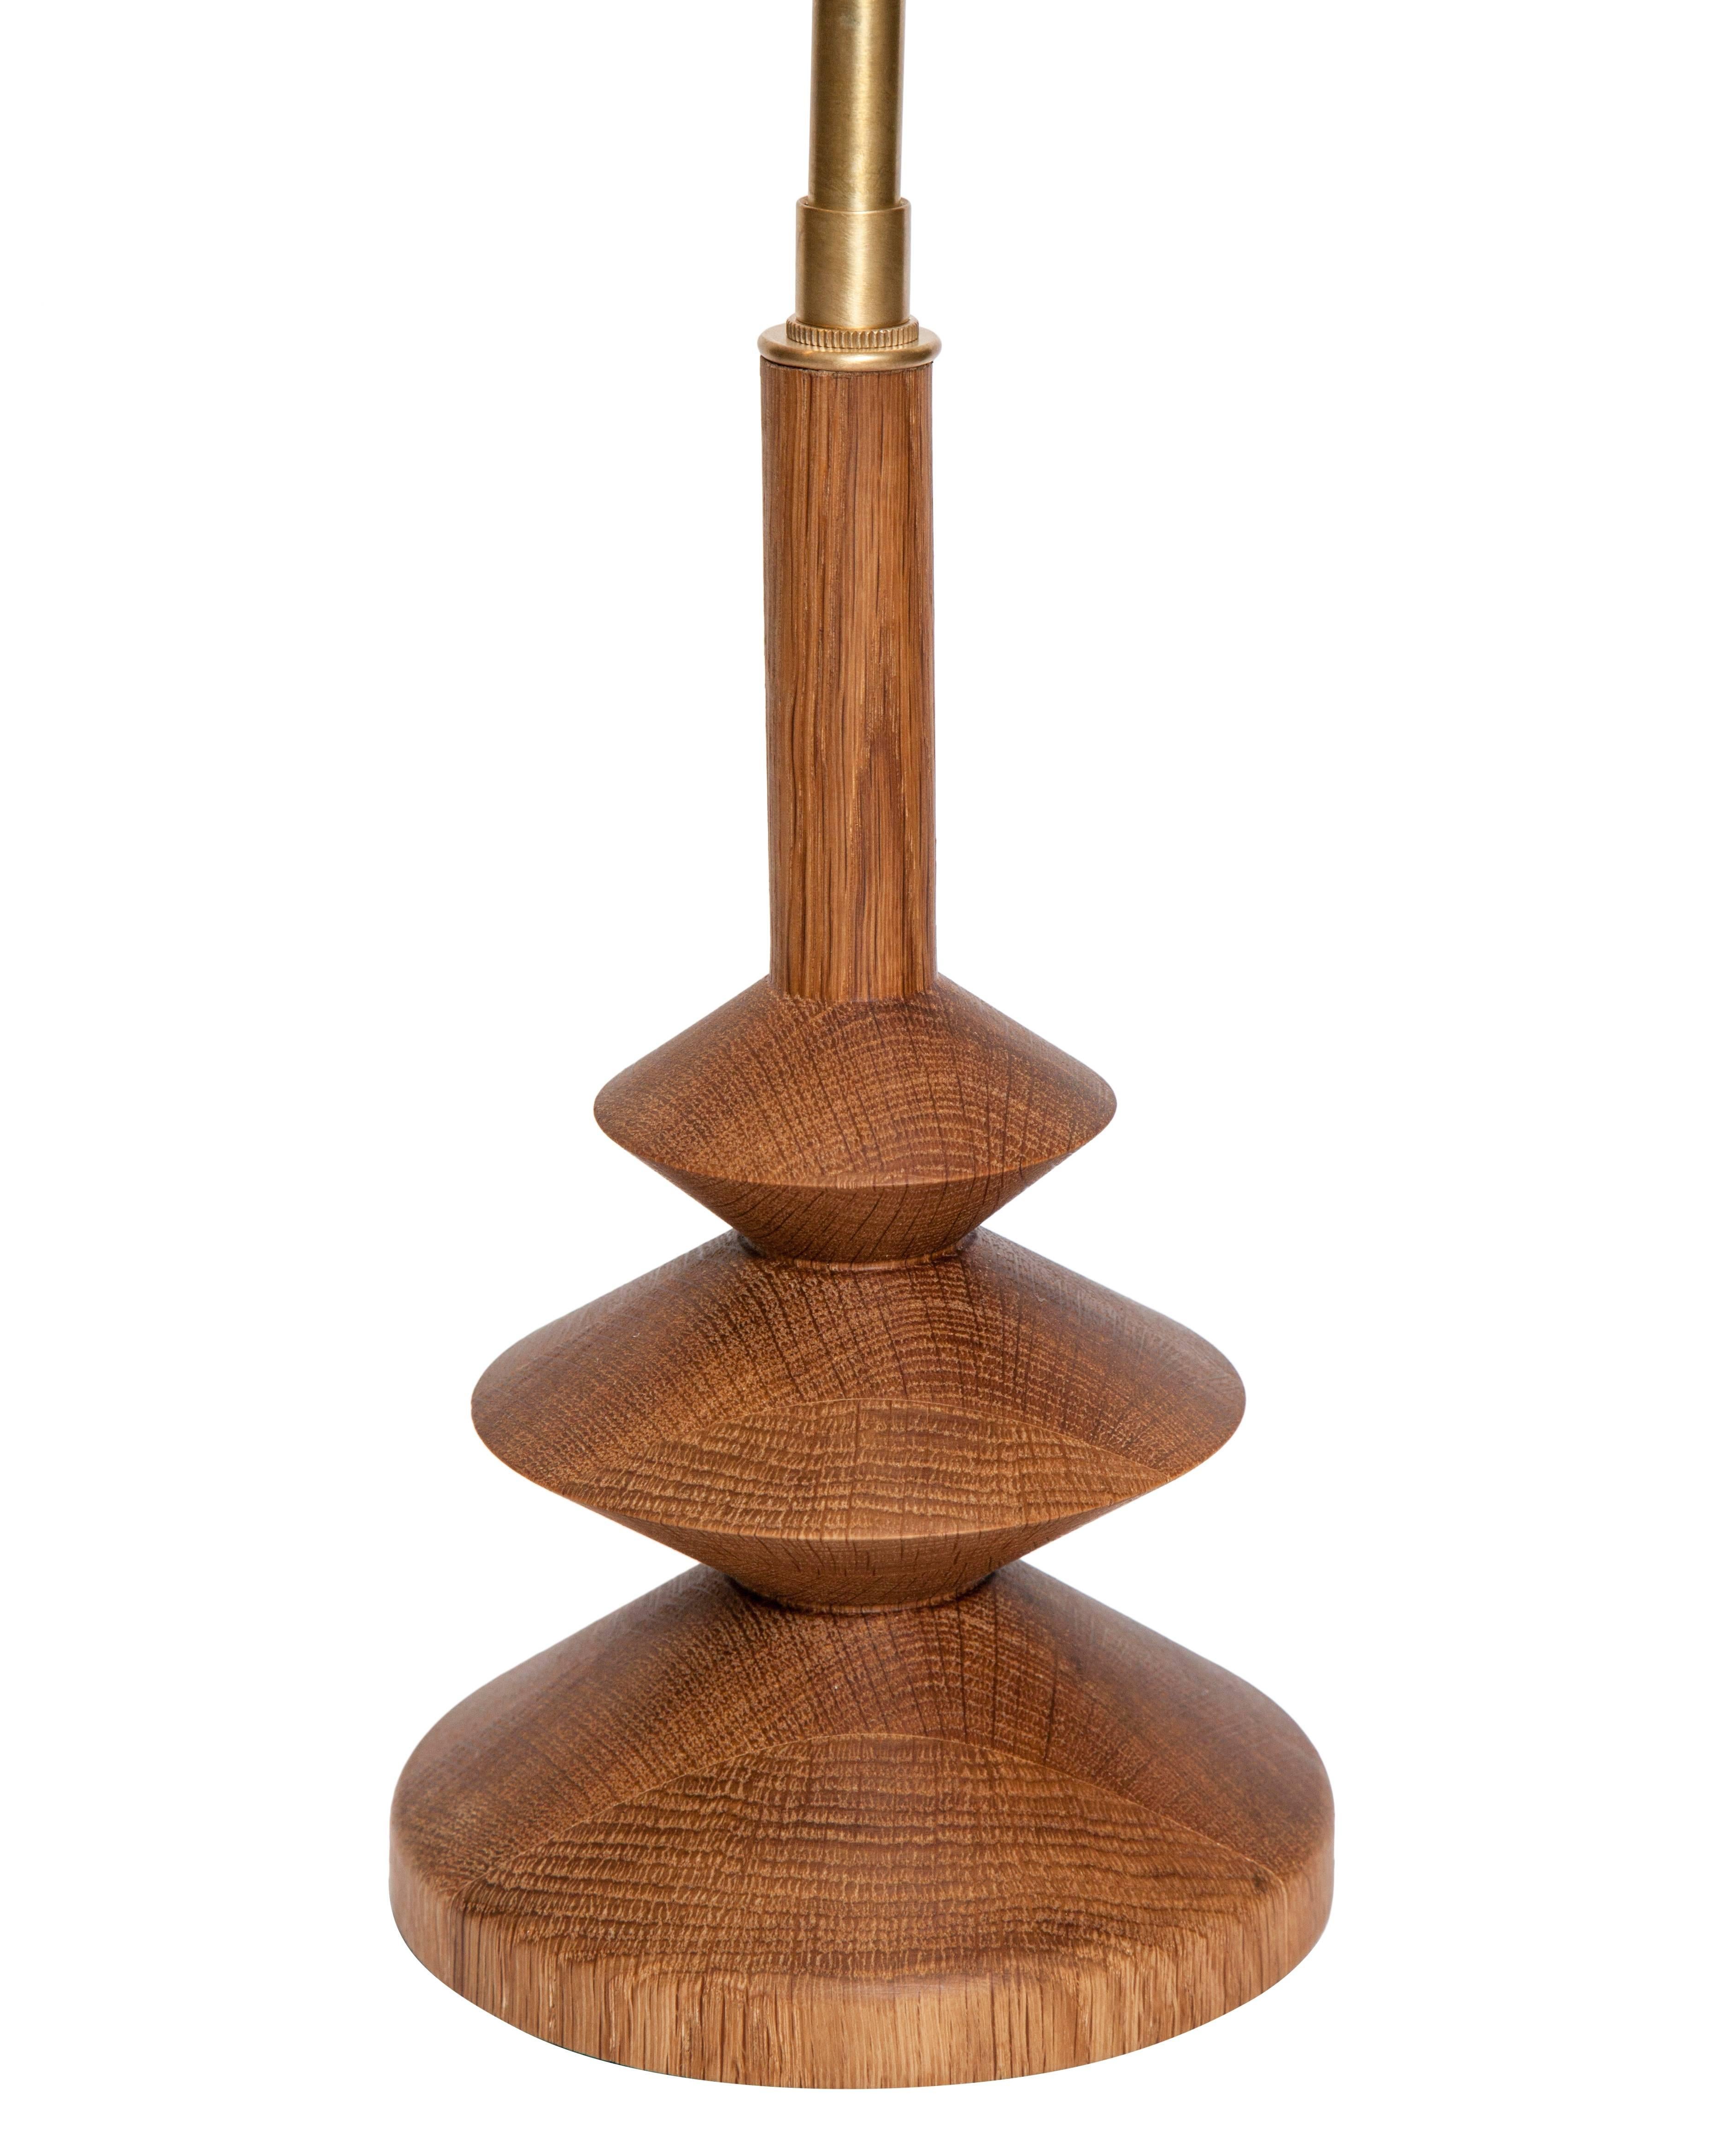 Solid turned oak table lamp with bronze stem double cluster adjustable height shade fixture.
Other woods and finishes available.
Wood base height-9